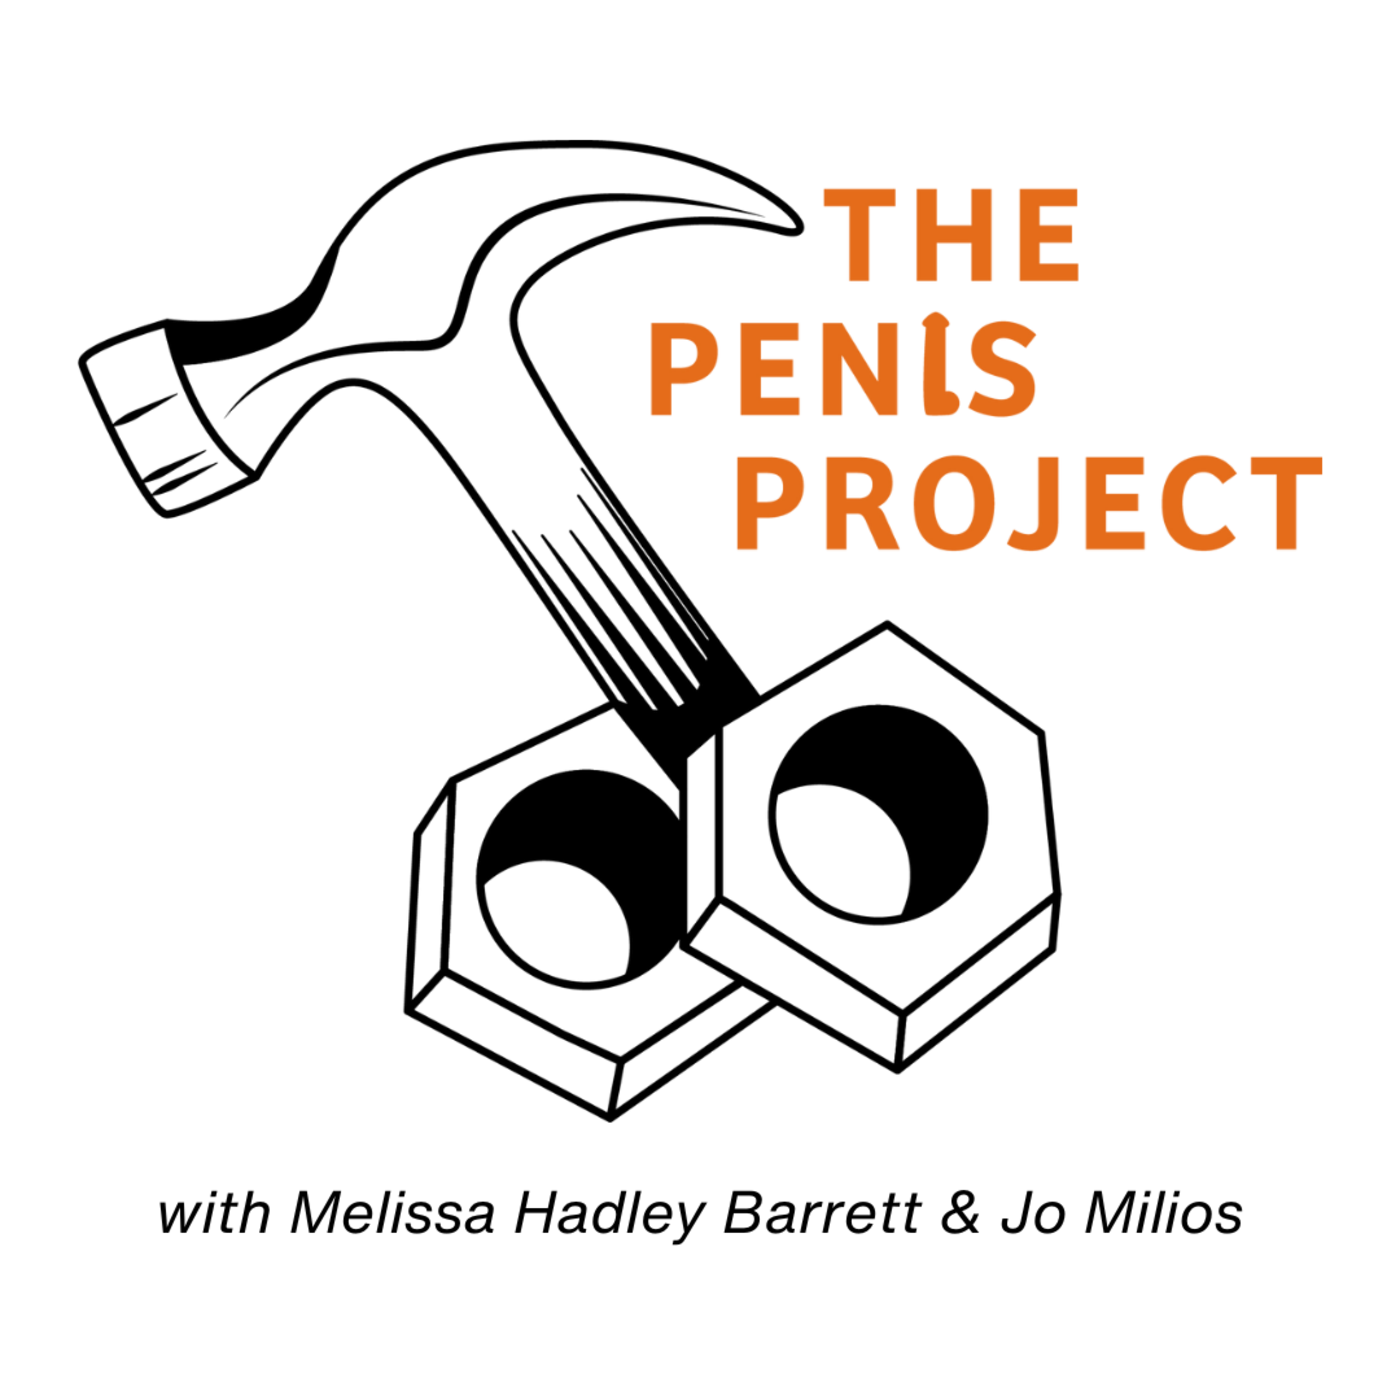 The Penis Project